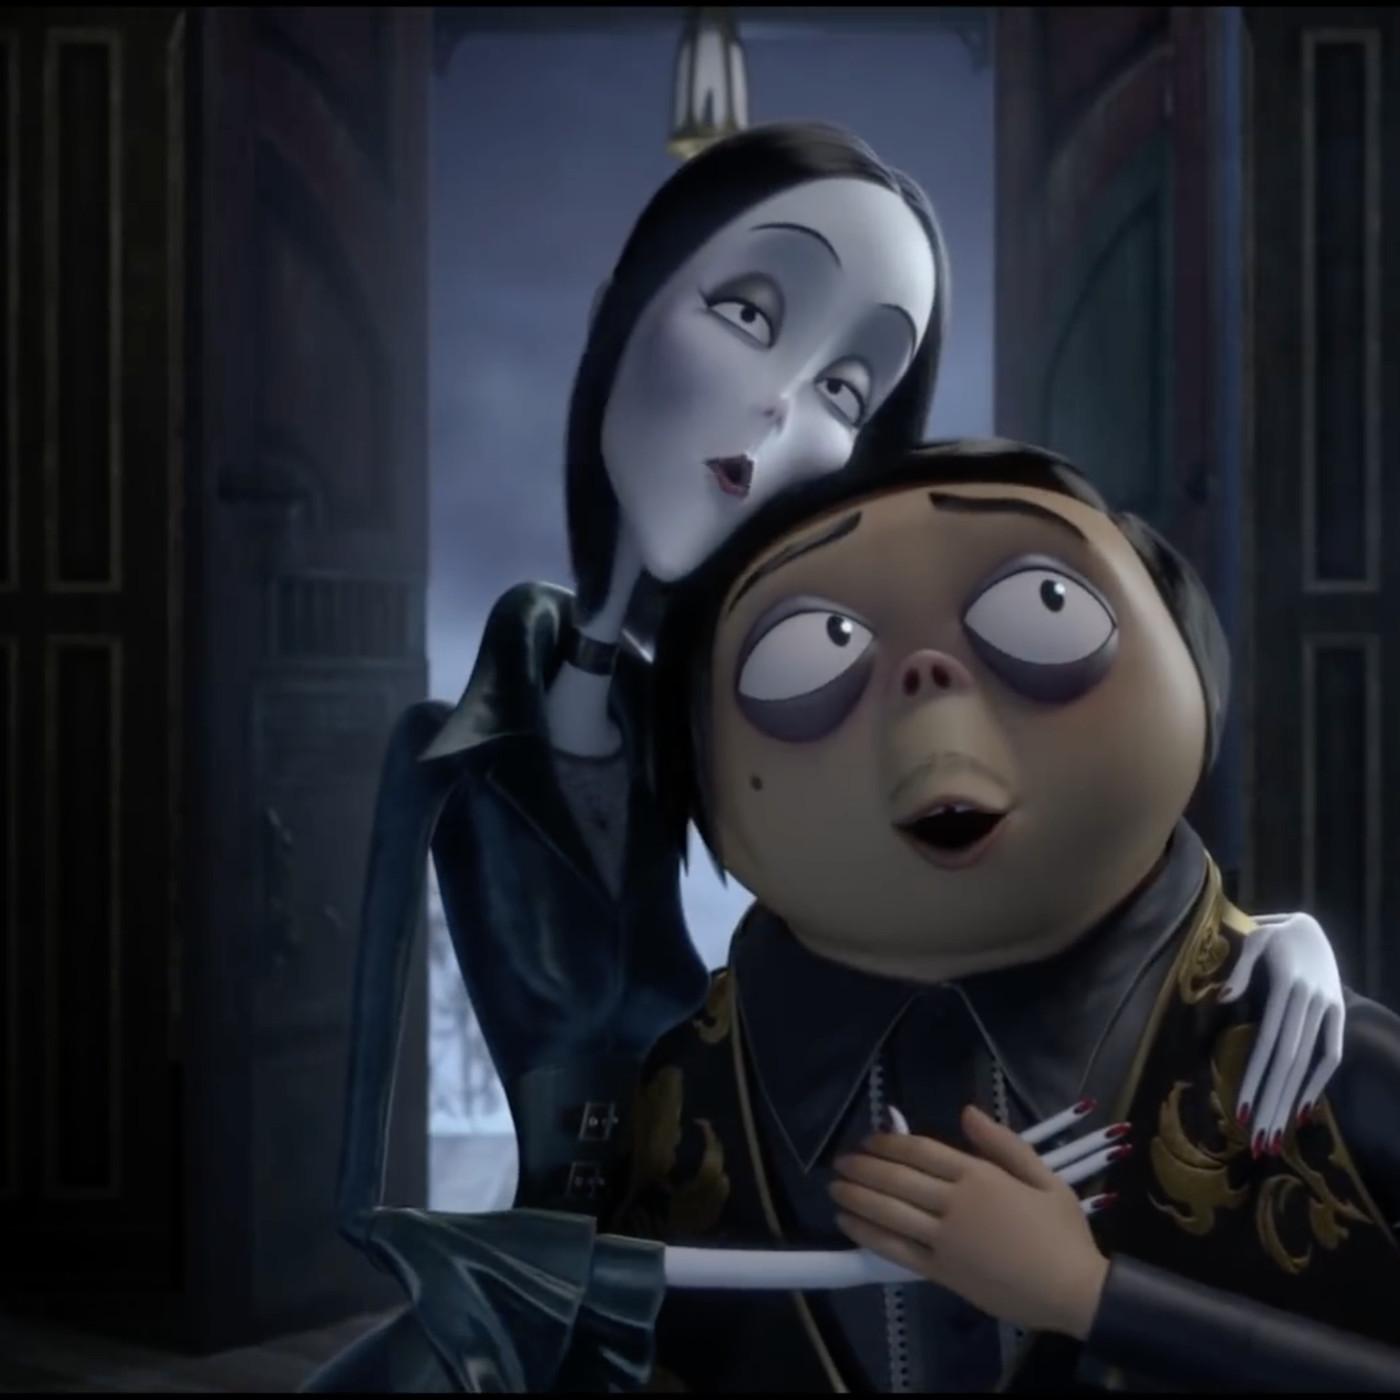 The first look at the new Addams Family is creepy and kooky